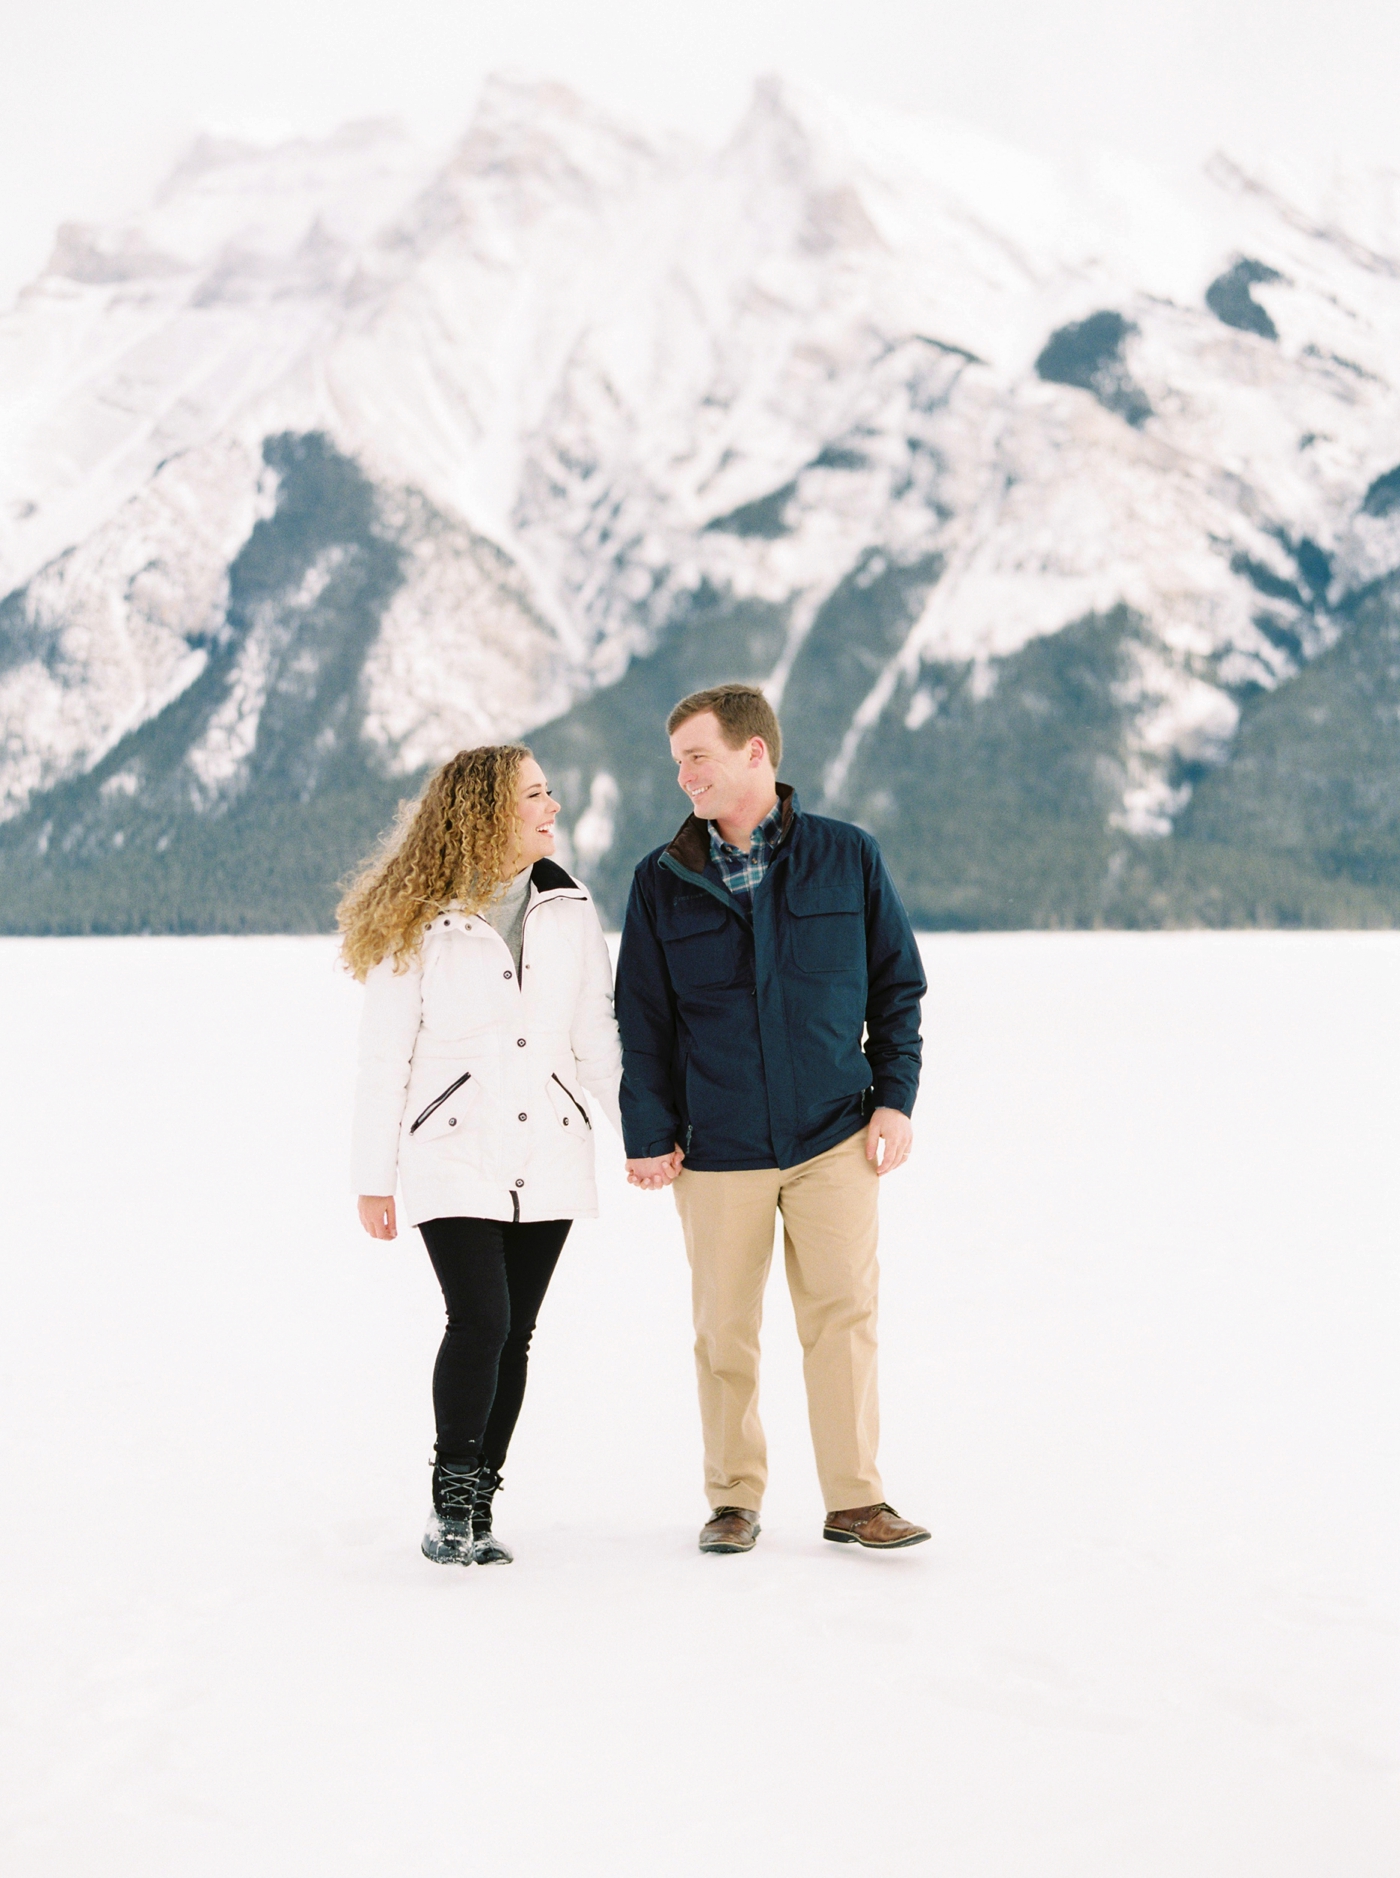 Winter anniversary session in banff | film photographers lake louise canadian rocky mountains | Justine Milton Photography